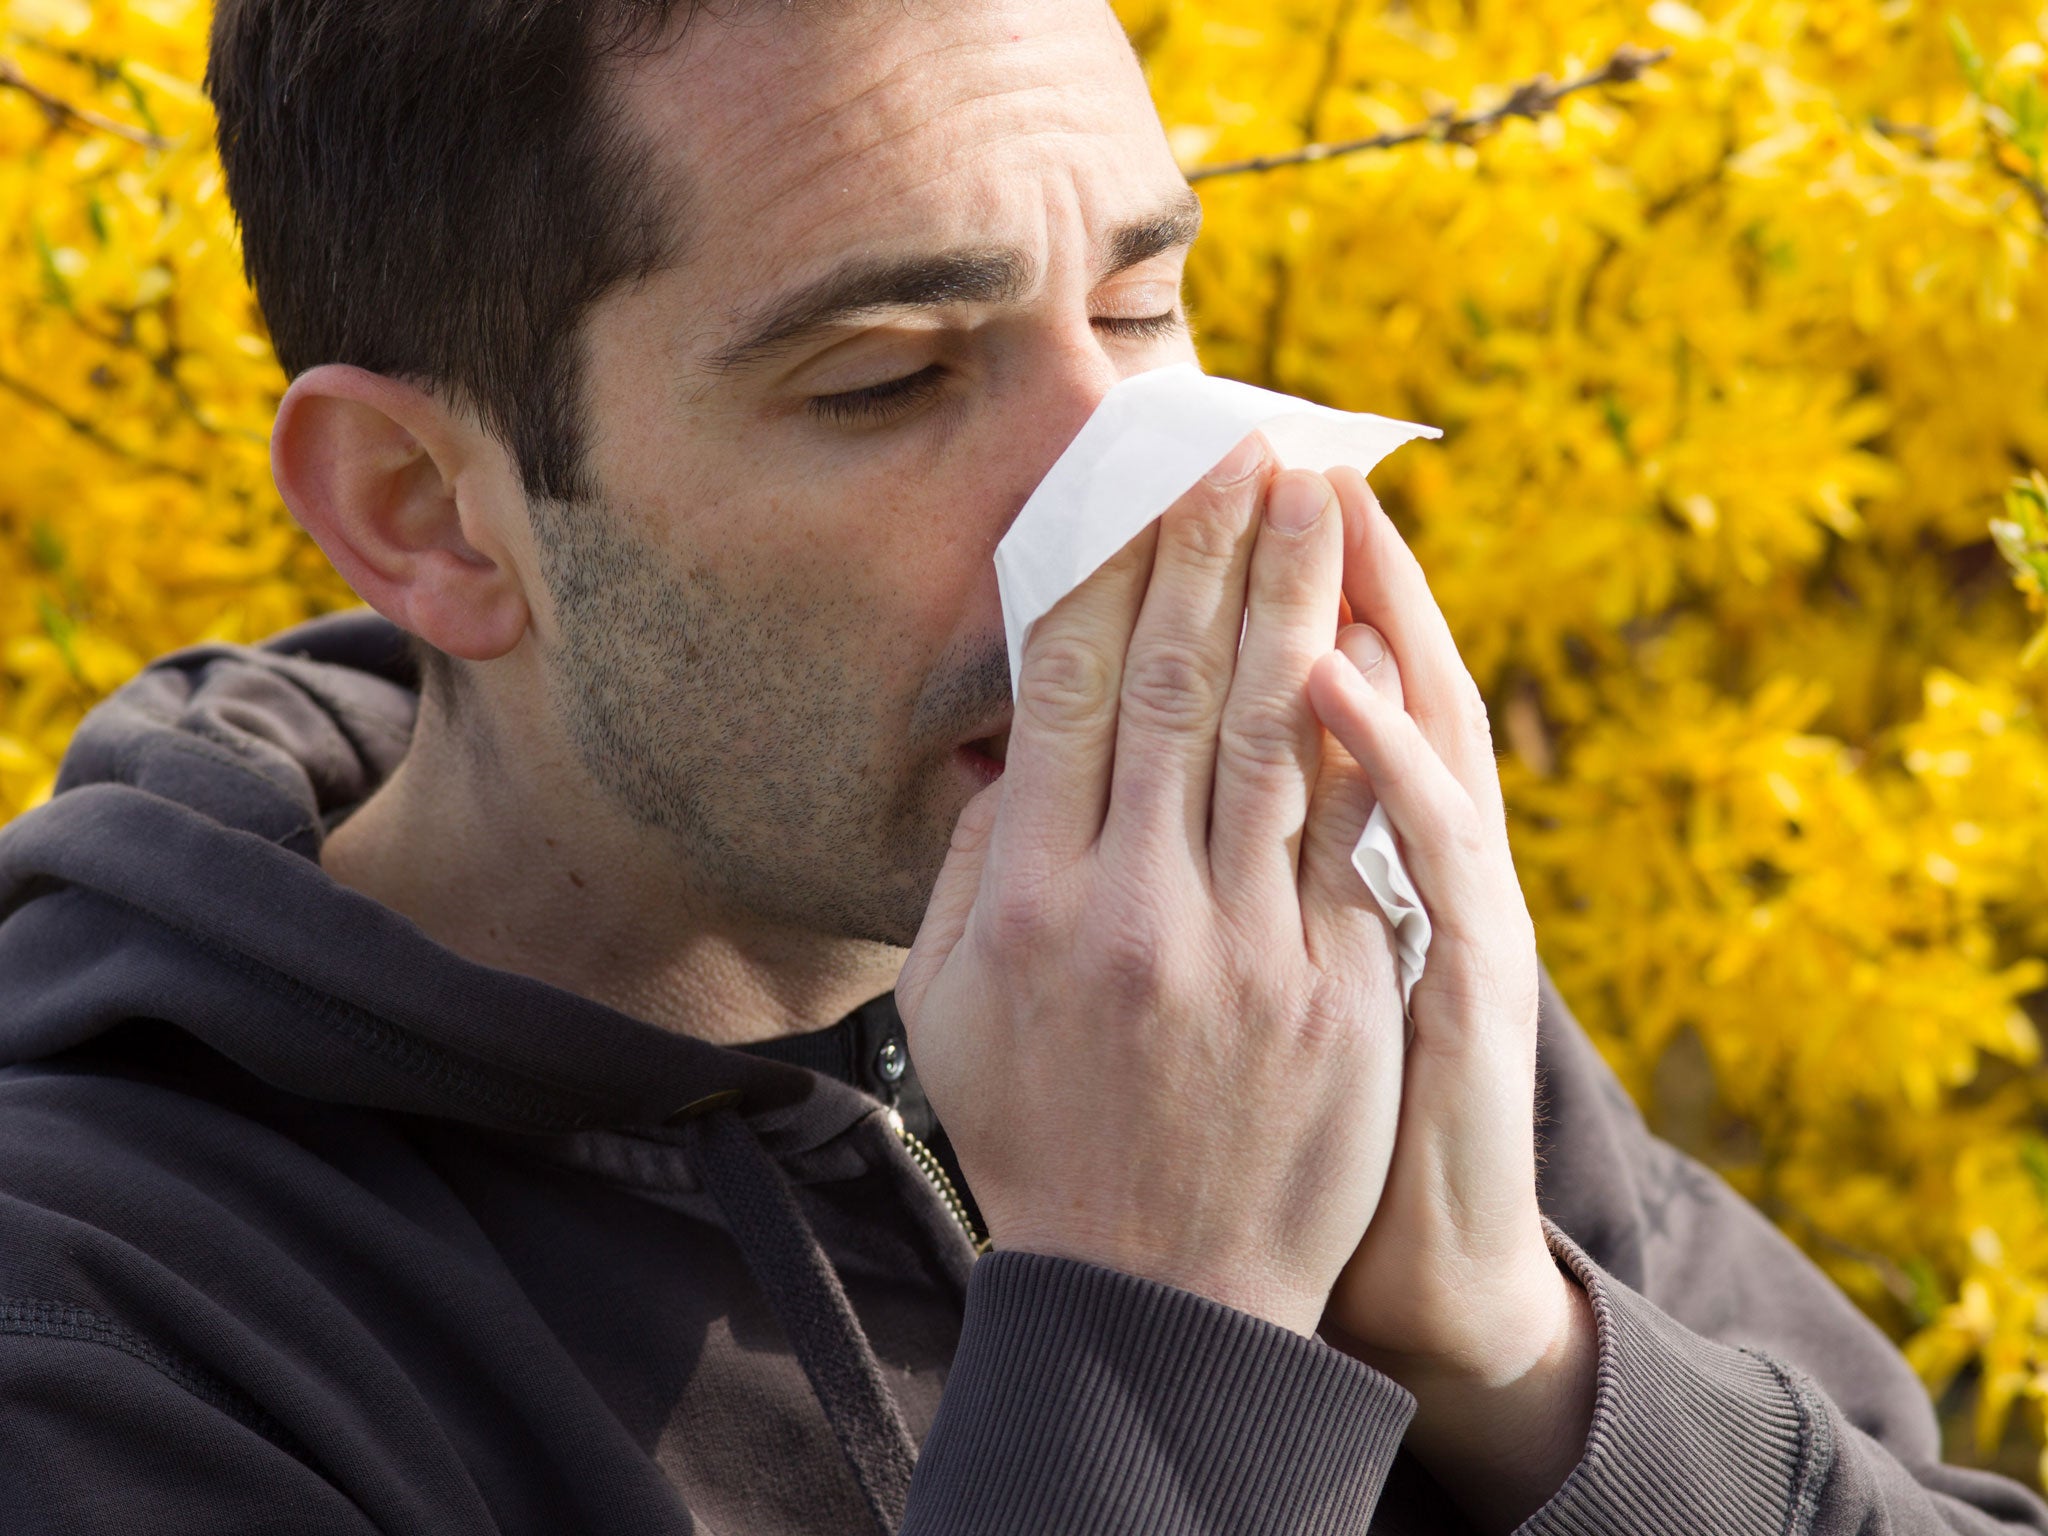 The UK is on alert for severe hay fever outbreaks with pollen levels rising due to a late Spring